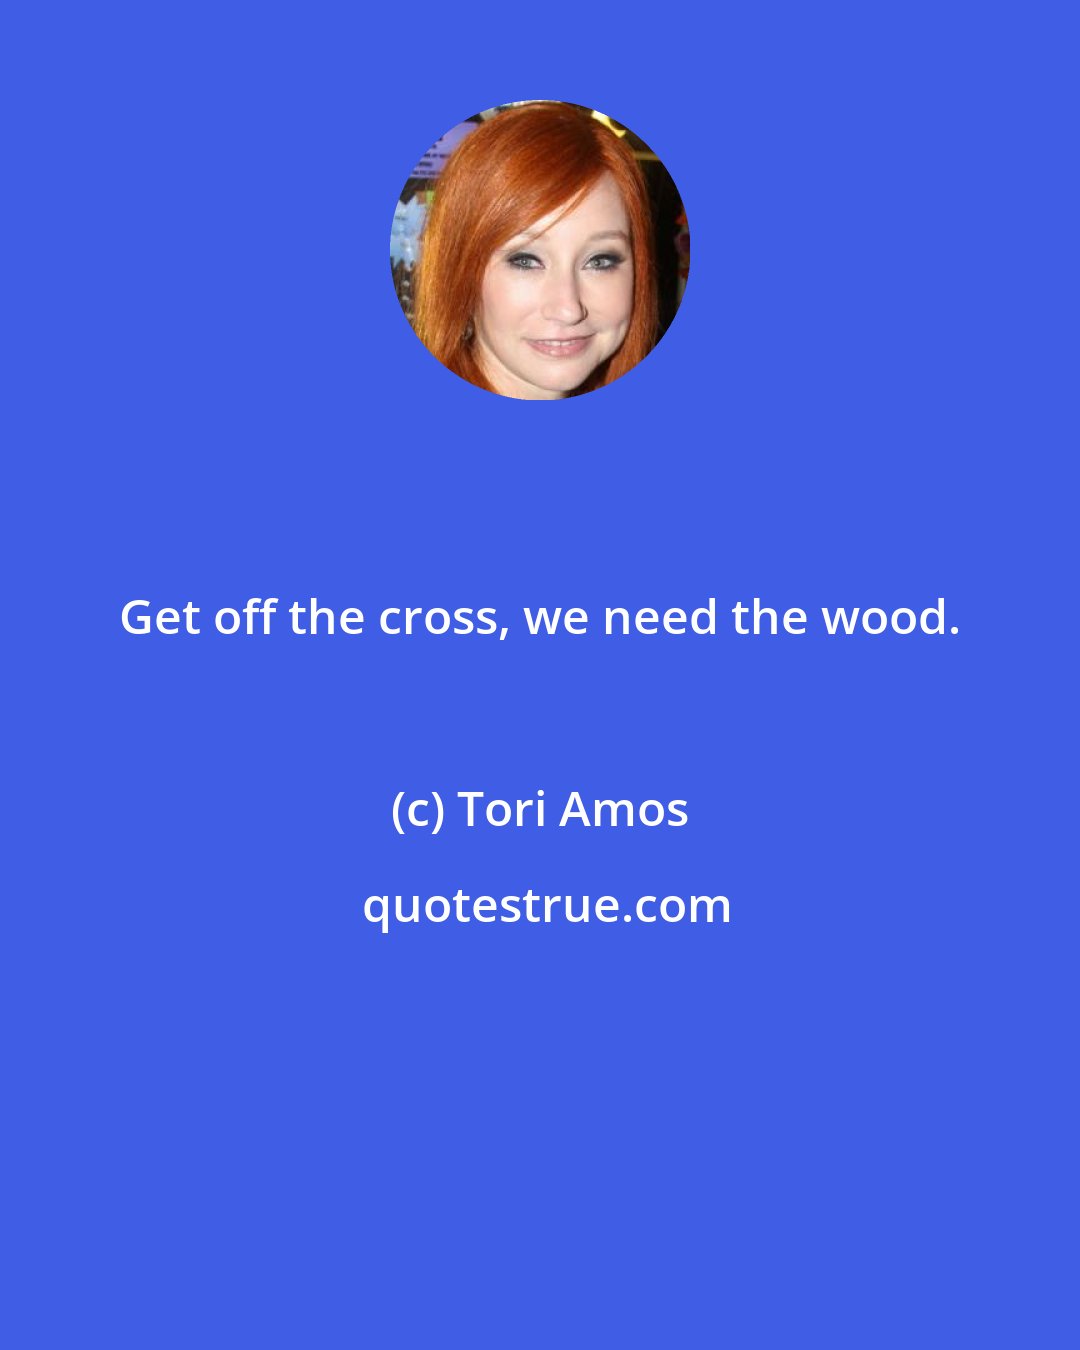 Tori Amos: Get off the cross, we need the wood.